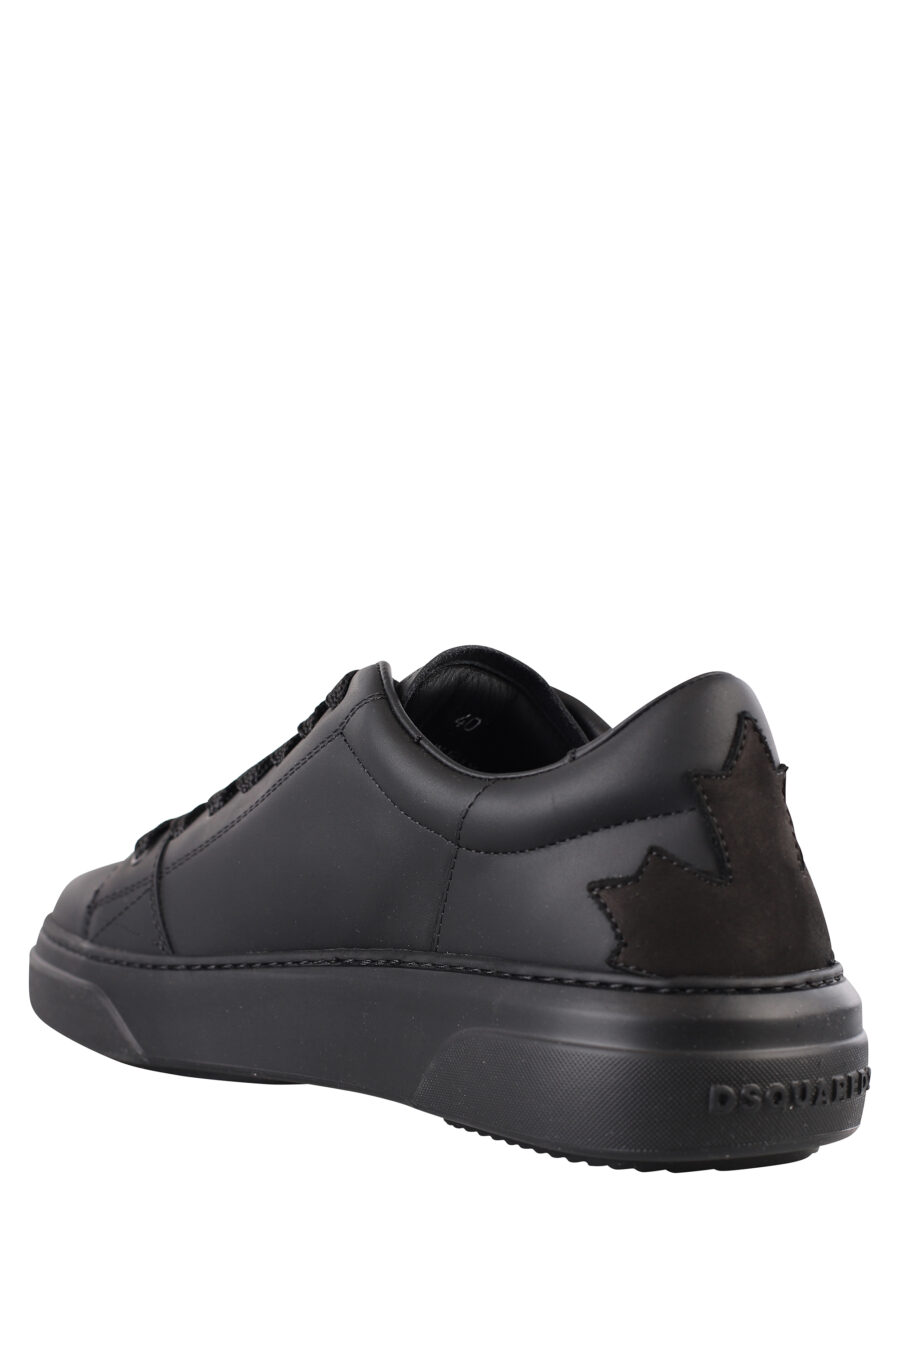 Black trainers with small white logo and black sole - IMG 1150